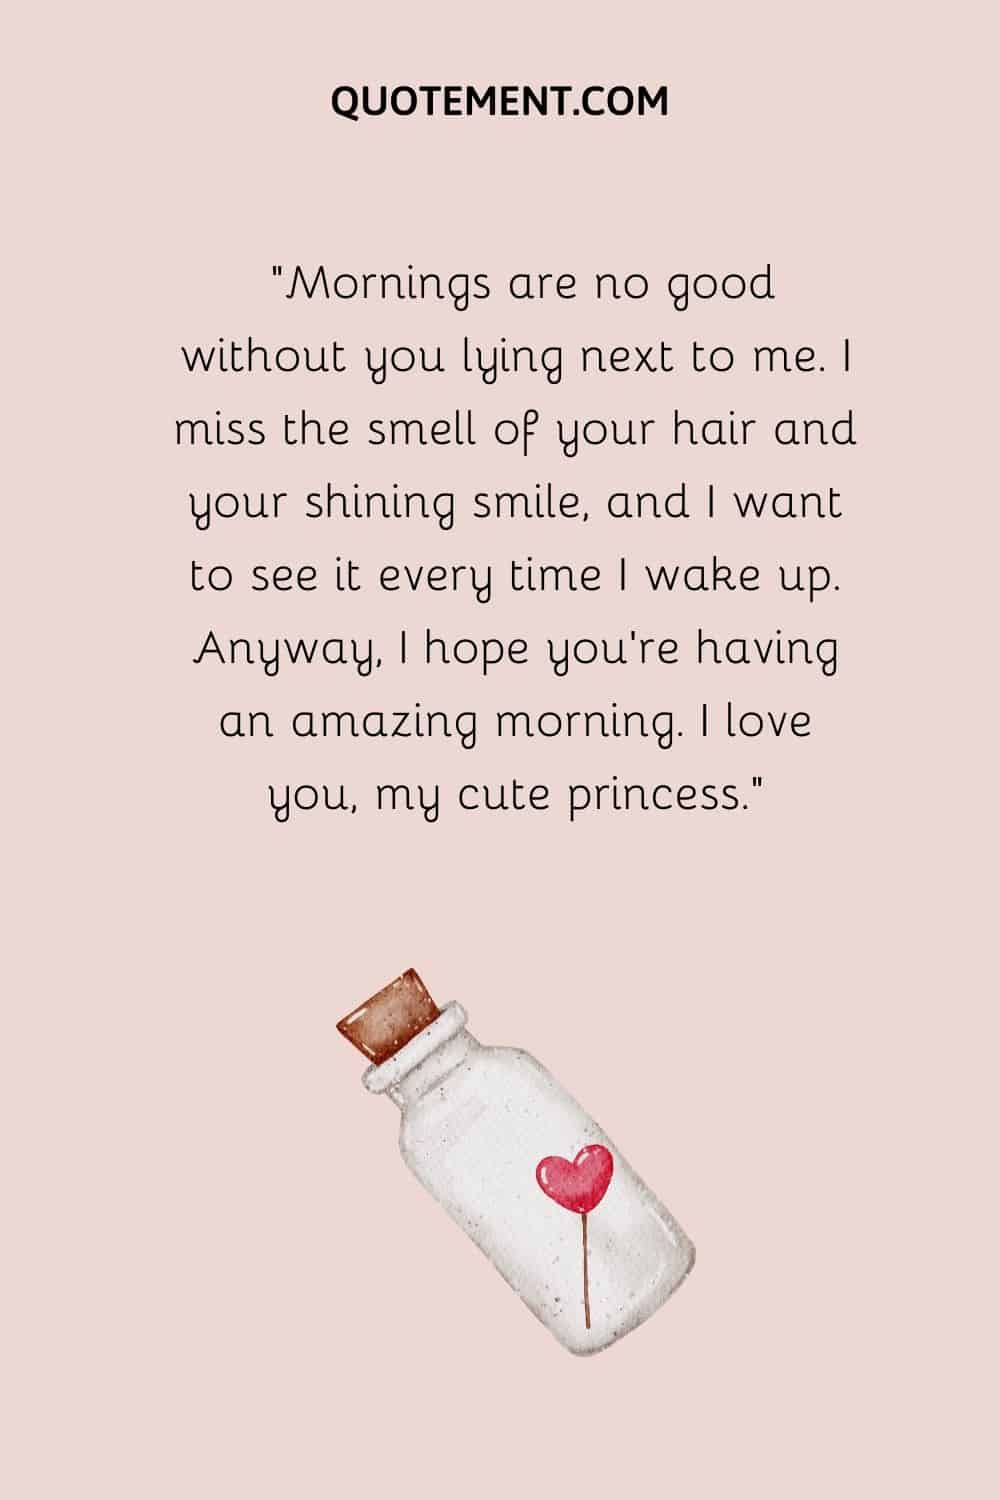 Mornings are no good without you lying next to me. I miss the smell of your hair and your shining smile, and I want to see it every time I wake up.